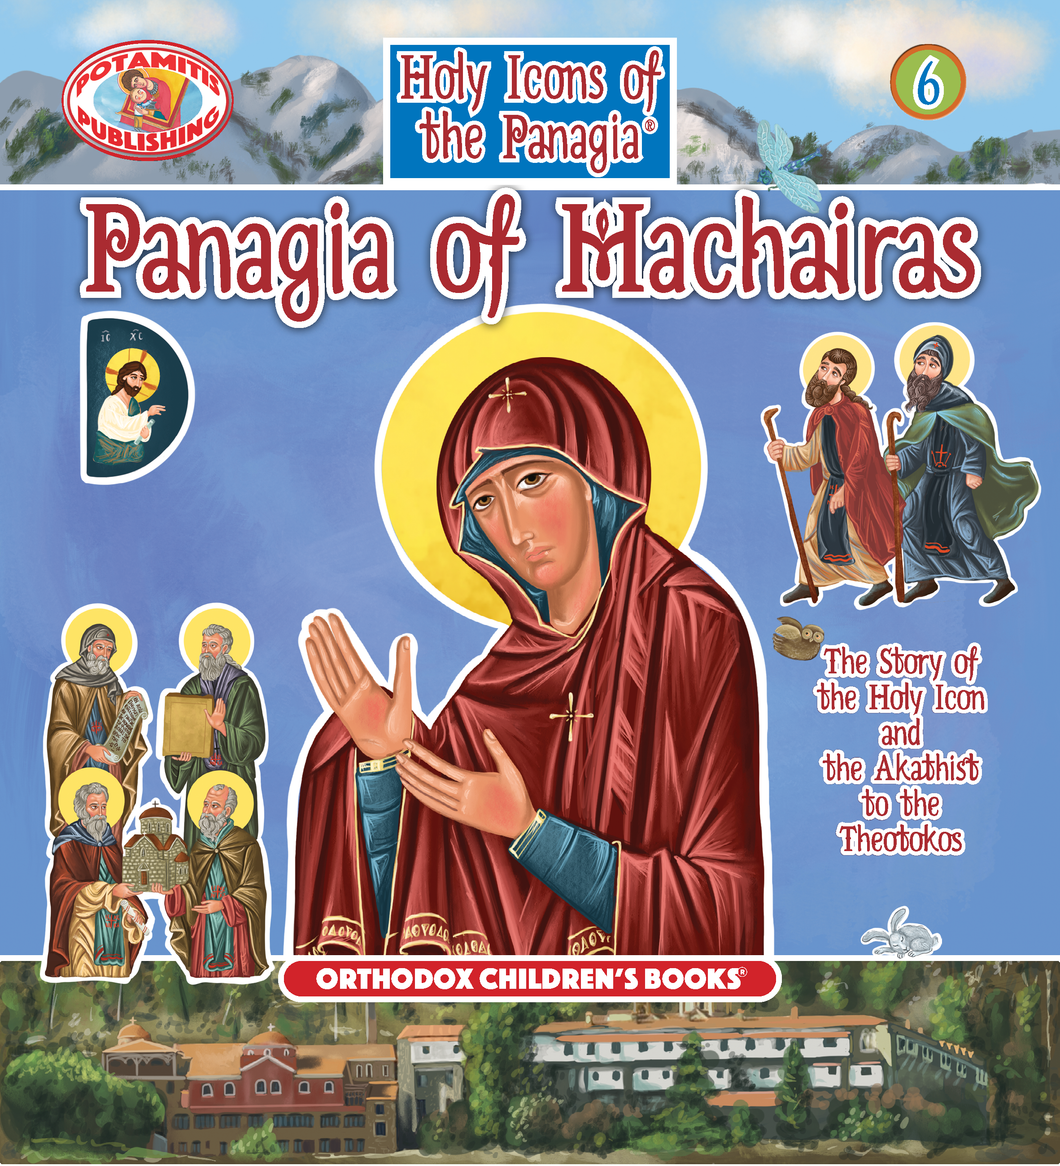 Holy Icons of the Panagia #7 - Panagia of Machairas